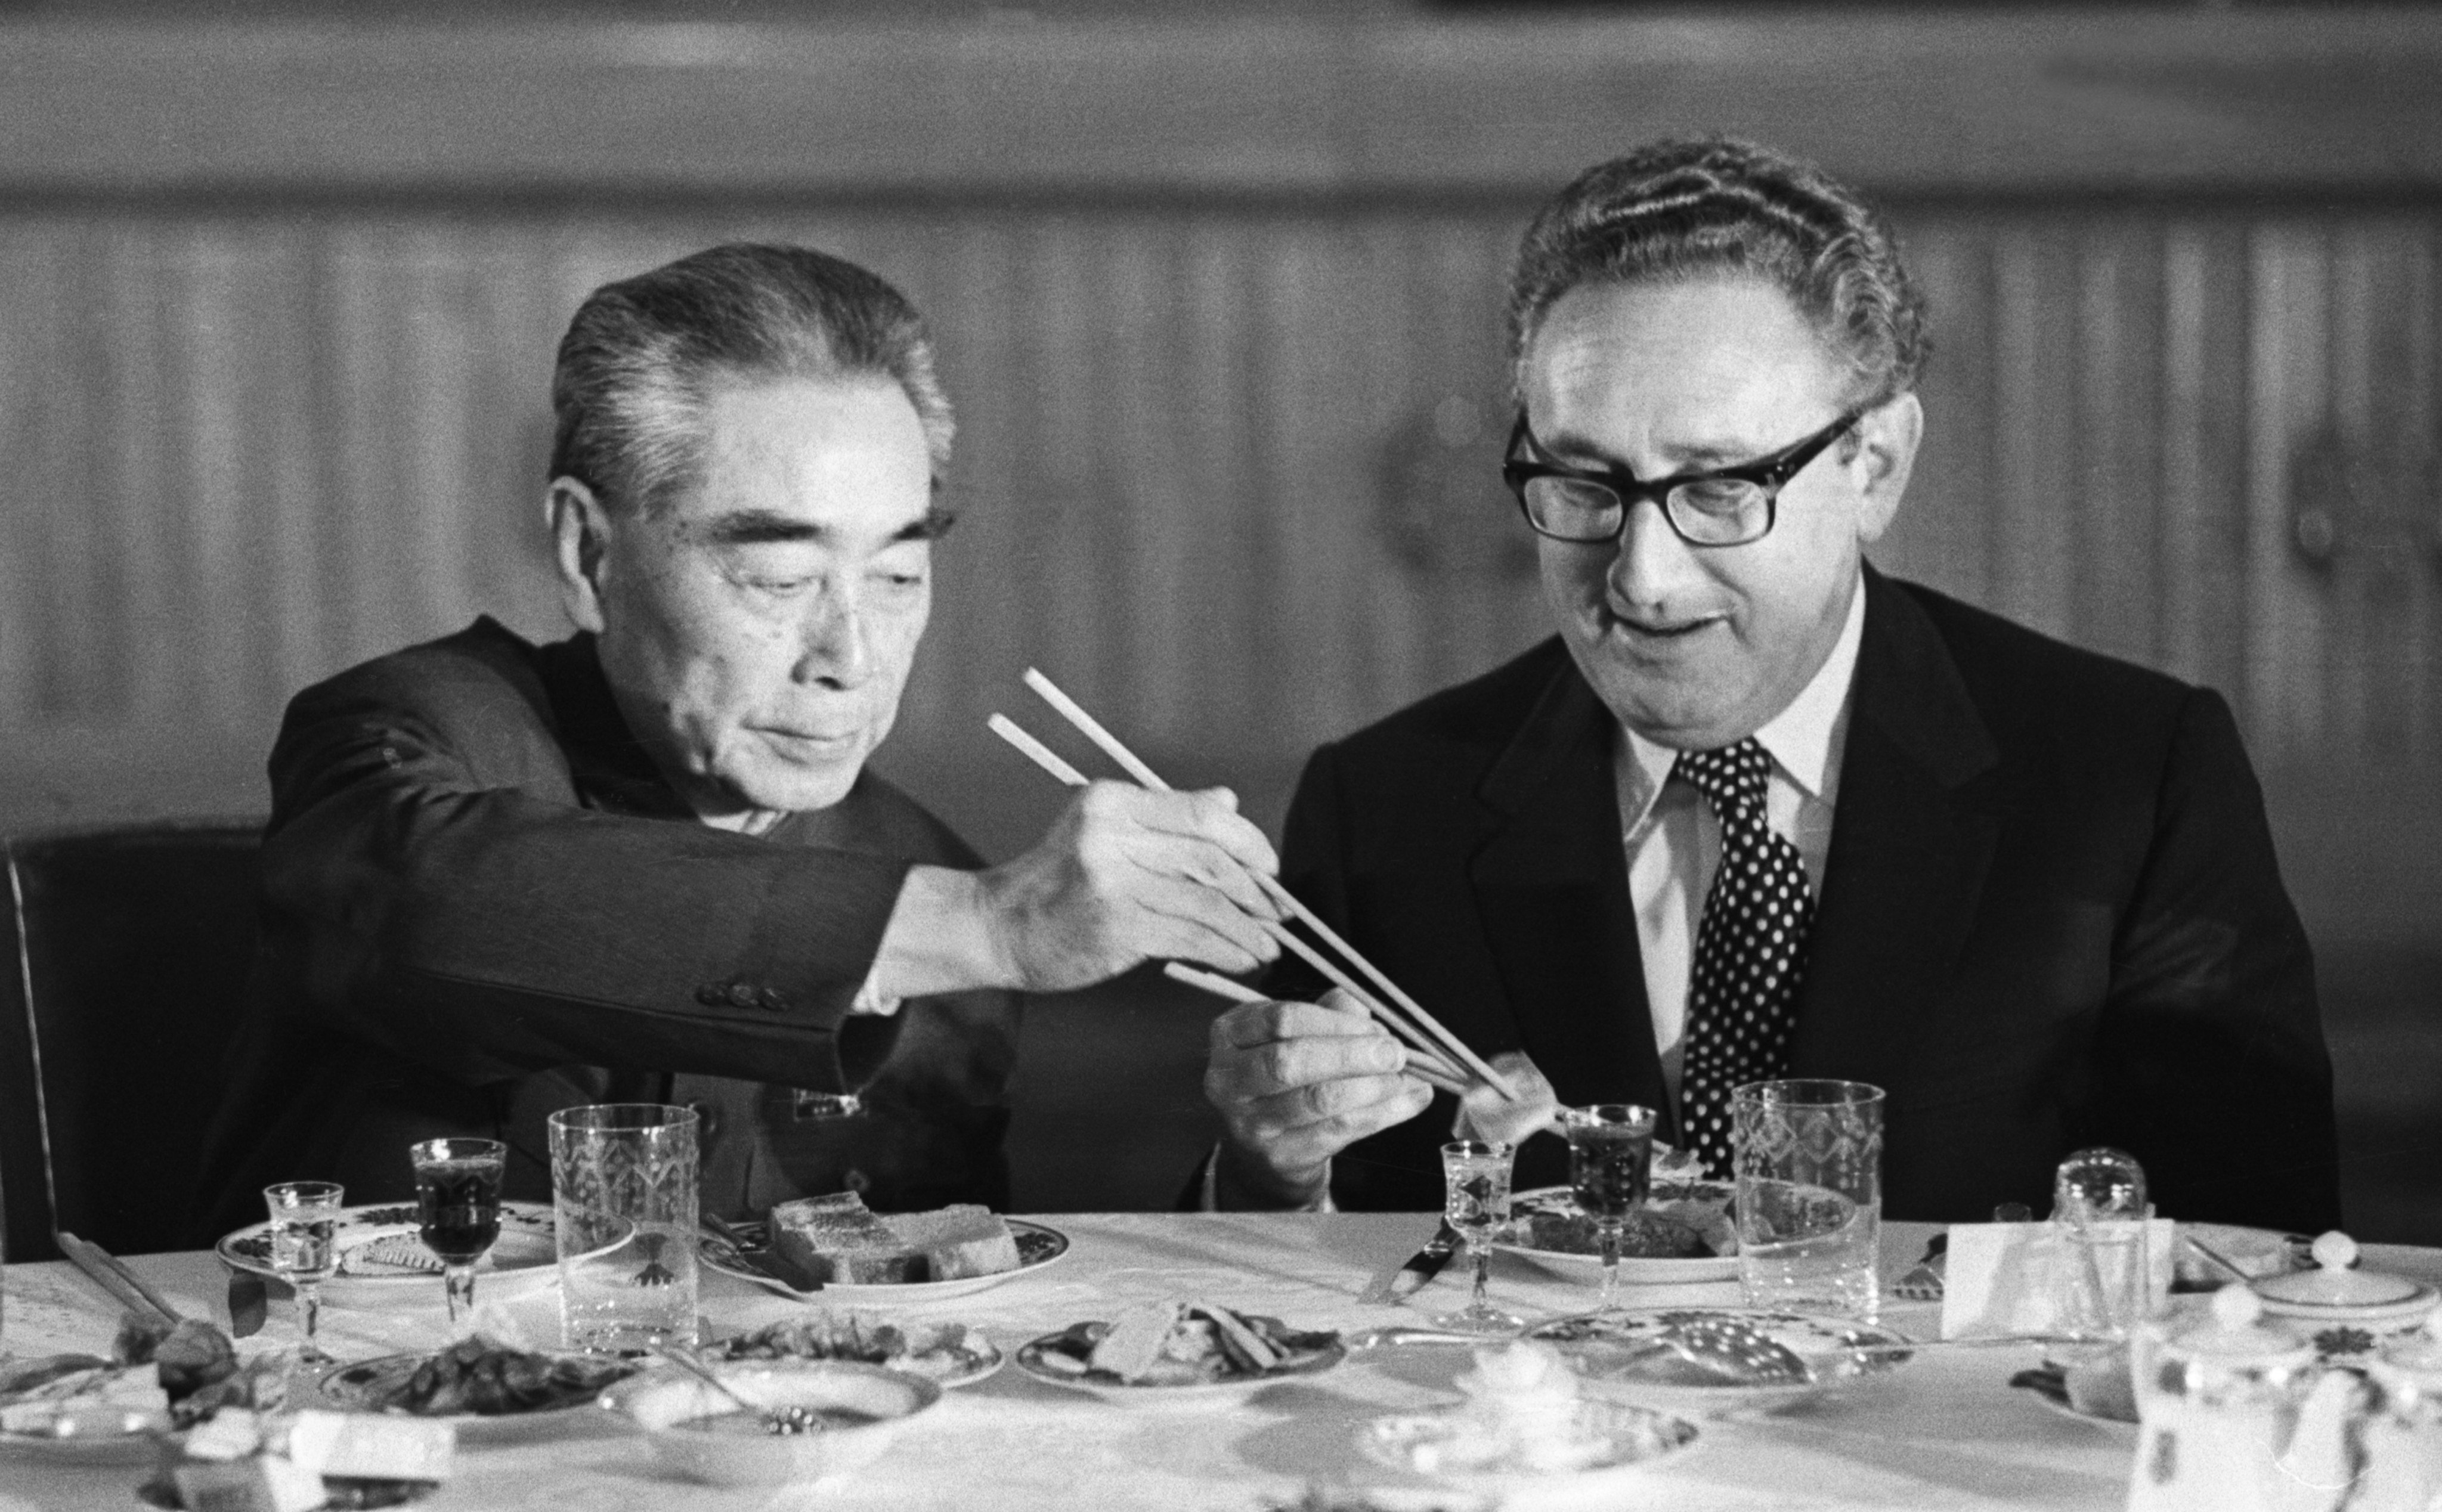 US secretary of state Henry Kissinger accepts food from Chinese premier Zhou Enlai during a state banquet in the Great Hall of the People in Beijing in 1973. Photo: Bettmann Archive